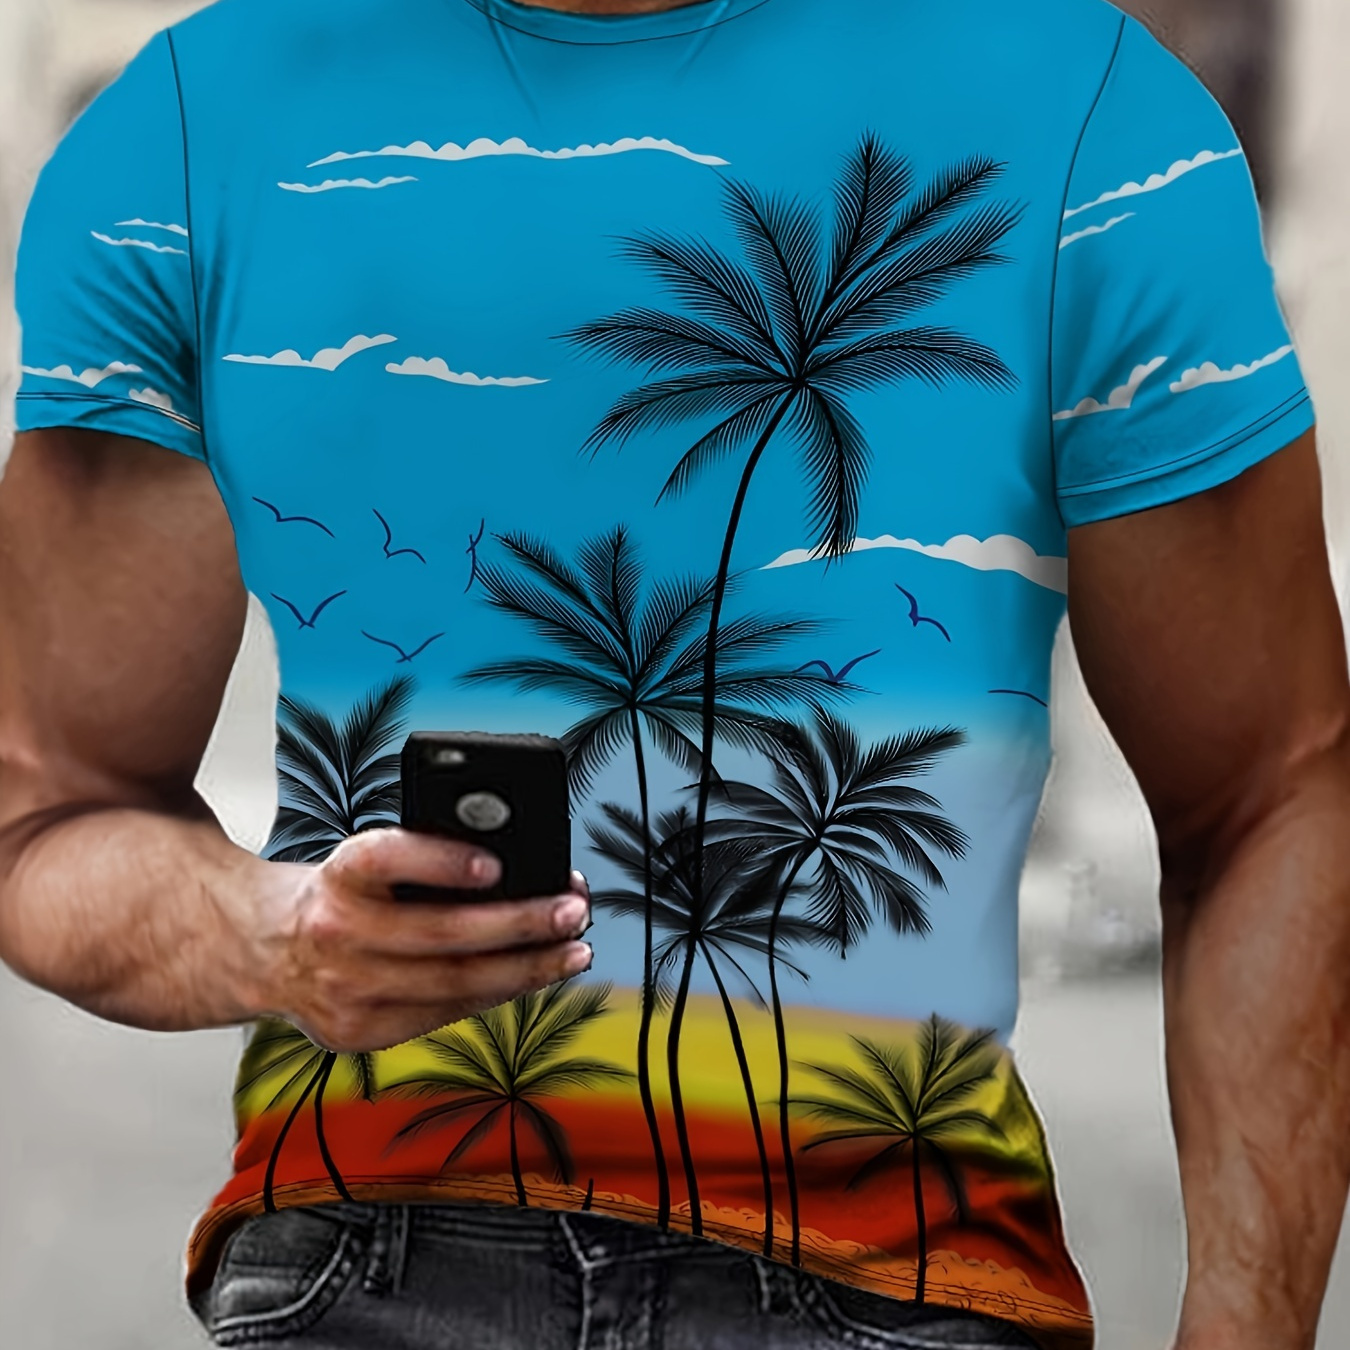 

Men's Coconut Trees Print T-shirt, Casual Short Sleeve Crew Neck Tee, Men's Clothing For Outdoor